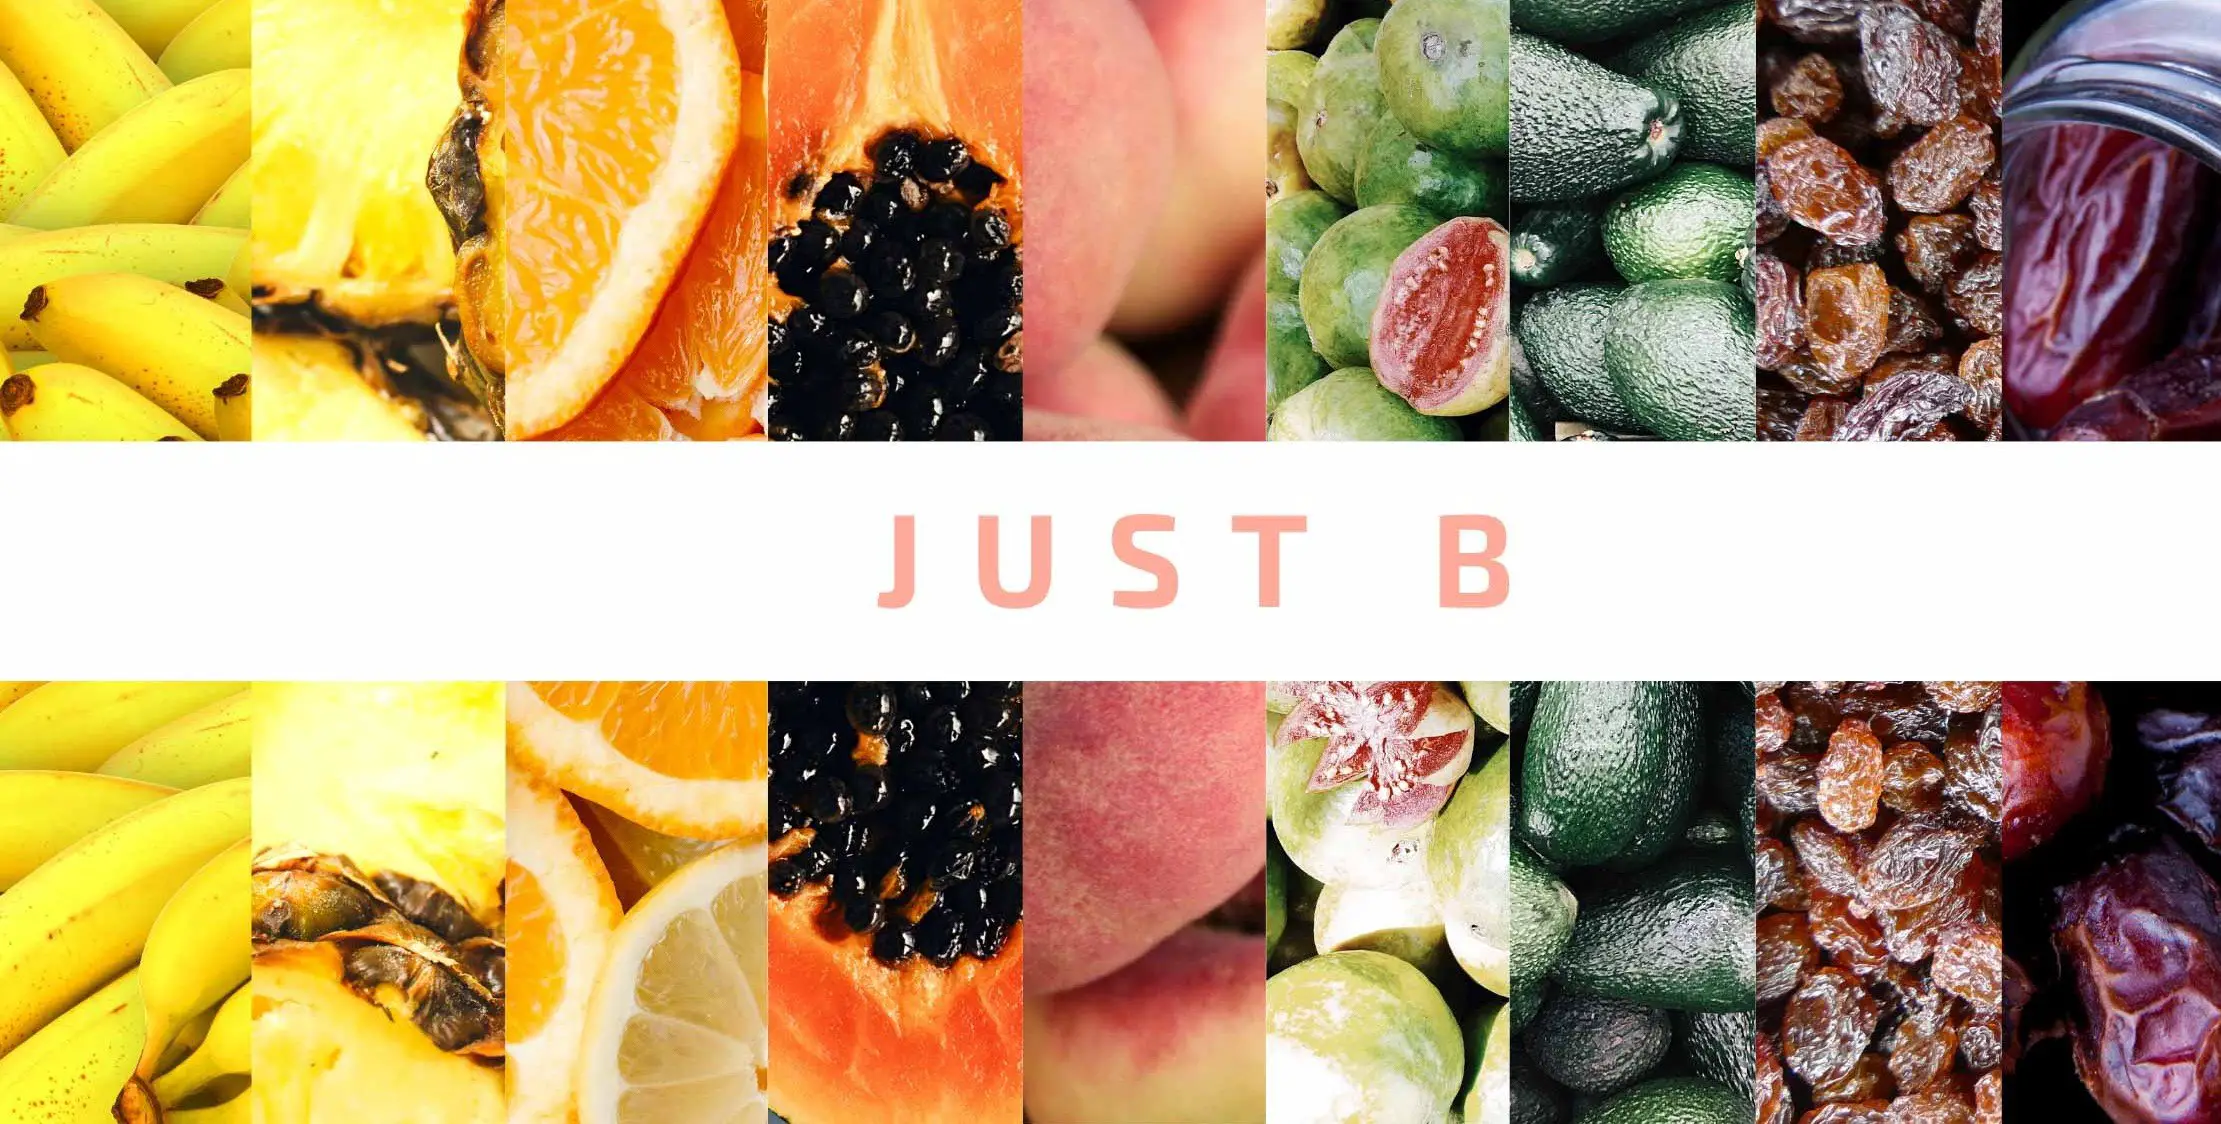 which fruits are rich in B Vitamins?